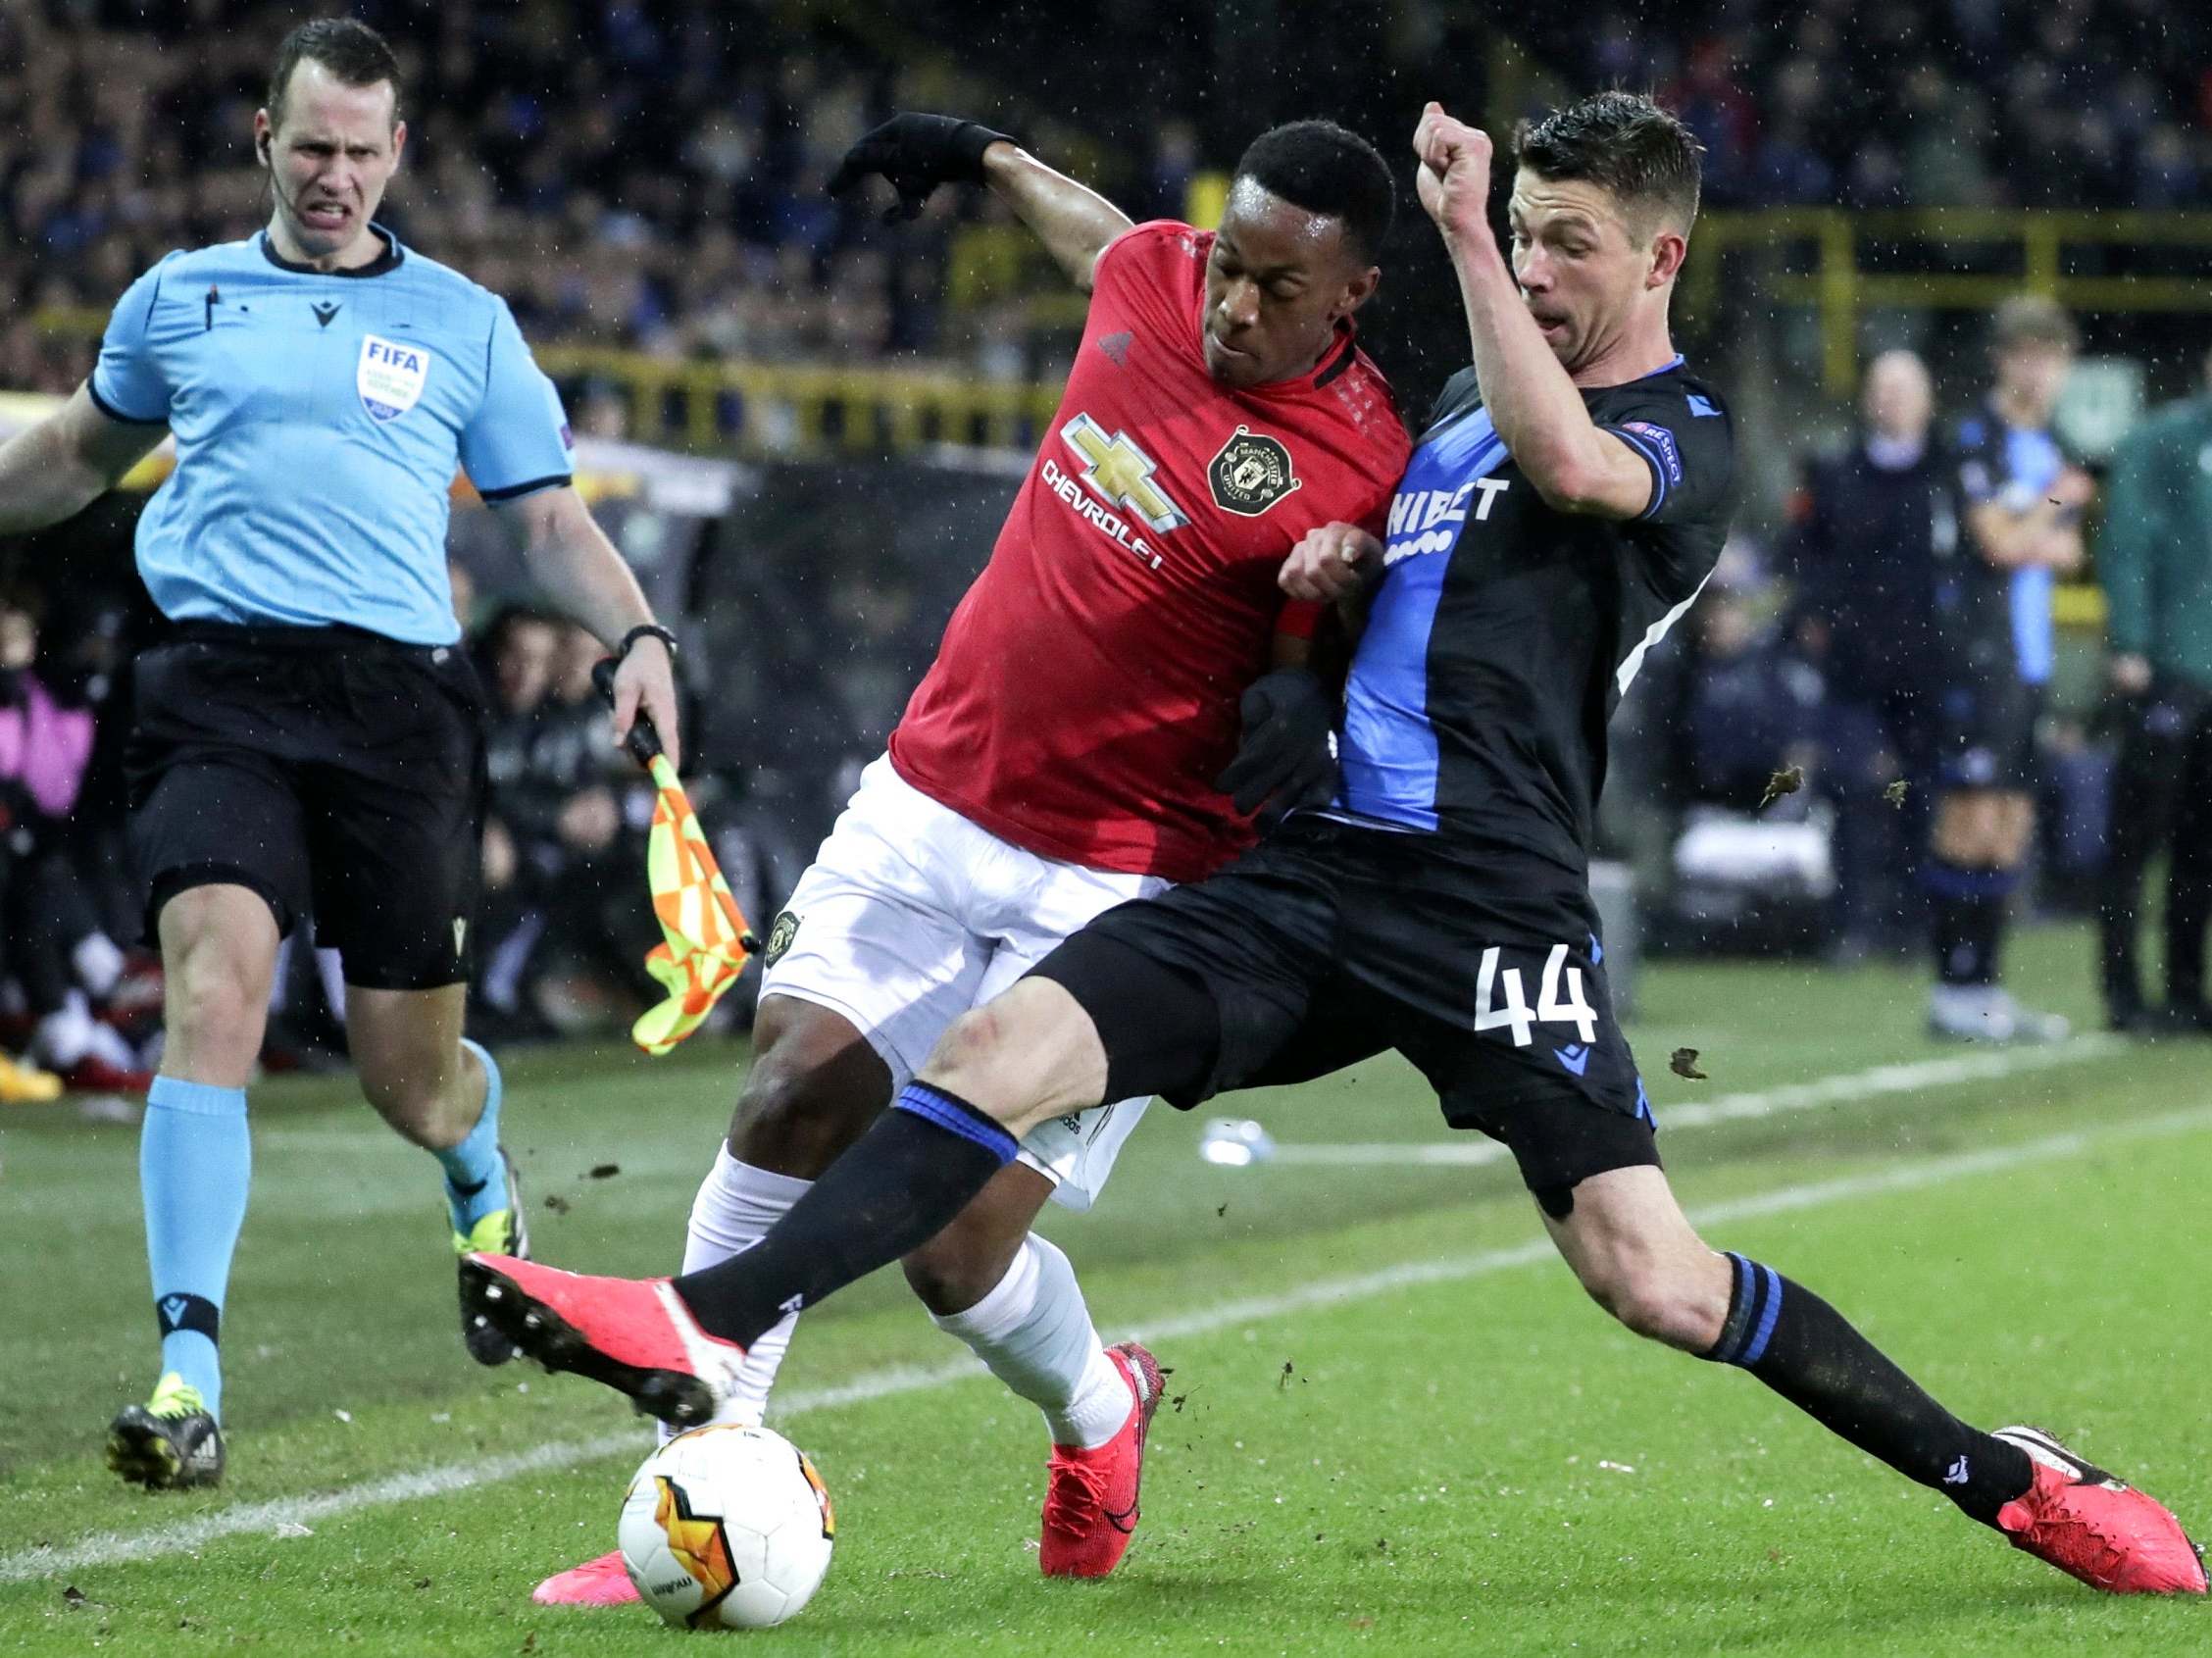 Club Brugge vs Manchester United result: Player ratings as Ole Gunnar Solskjaer's side held to a draw